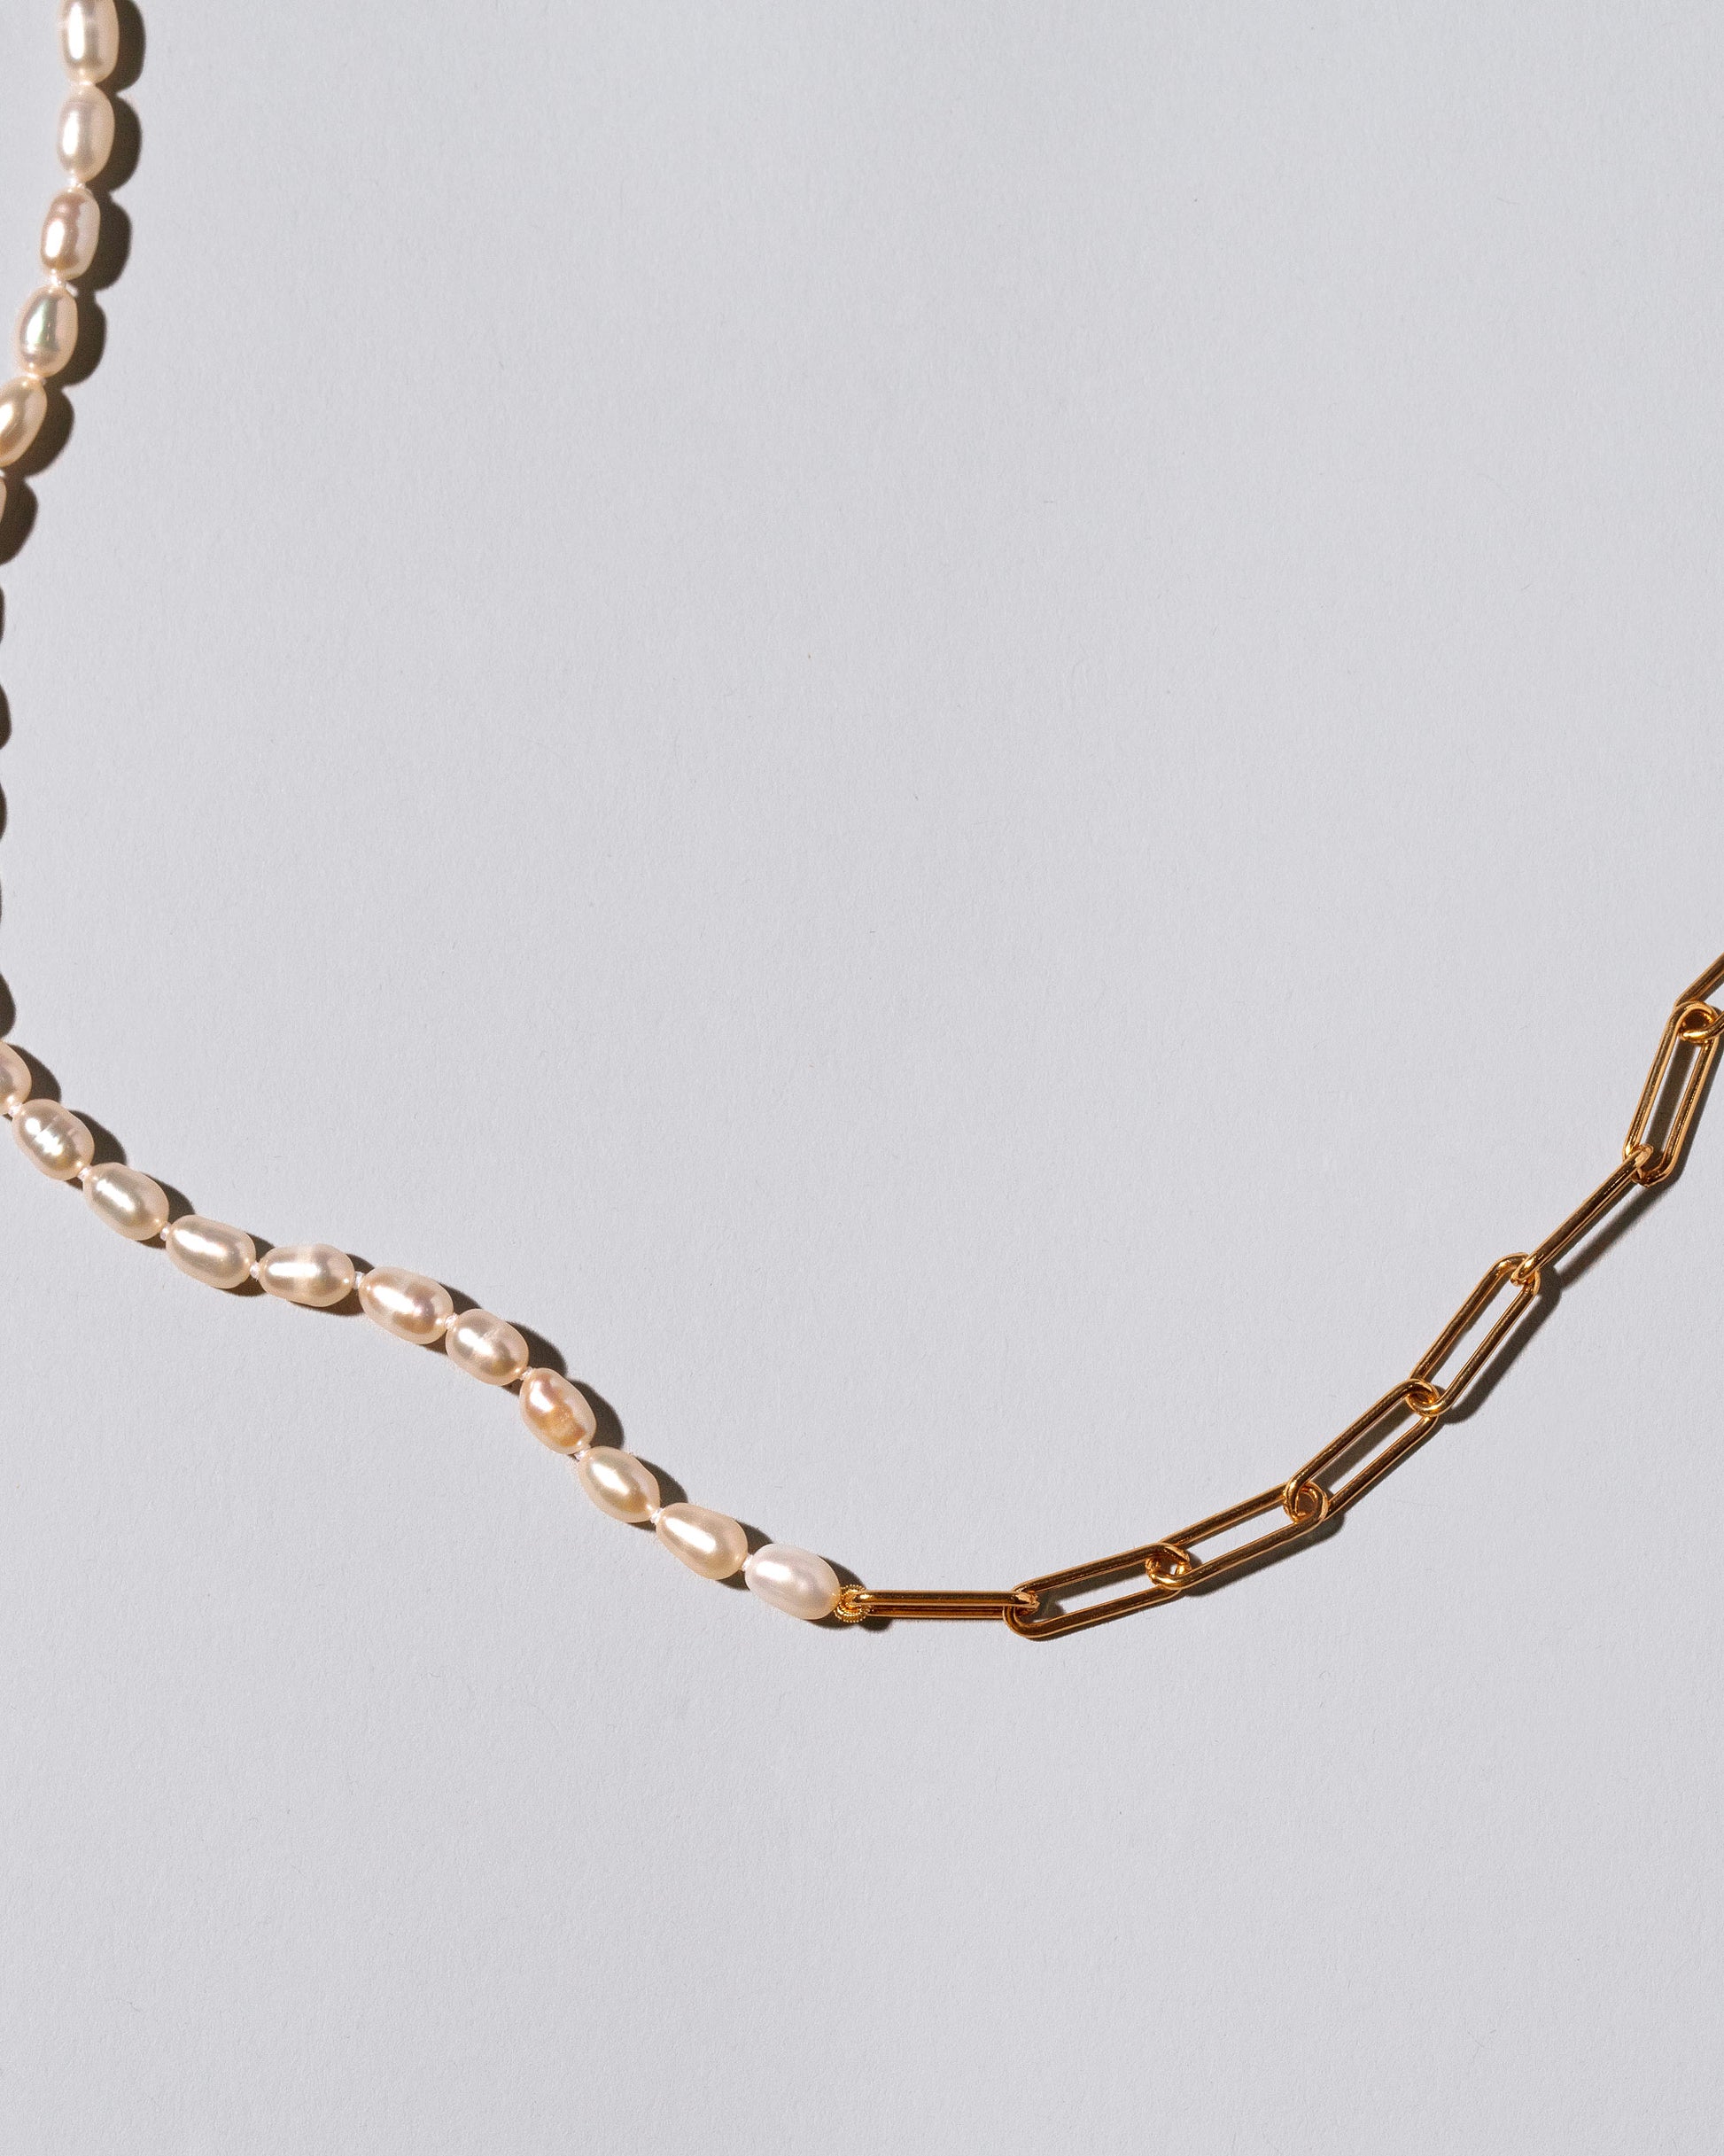 Closeup detail of the Rice Pearl Long Oval Necklace on light color background.